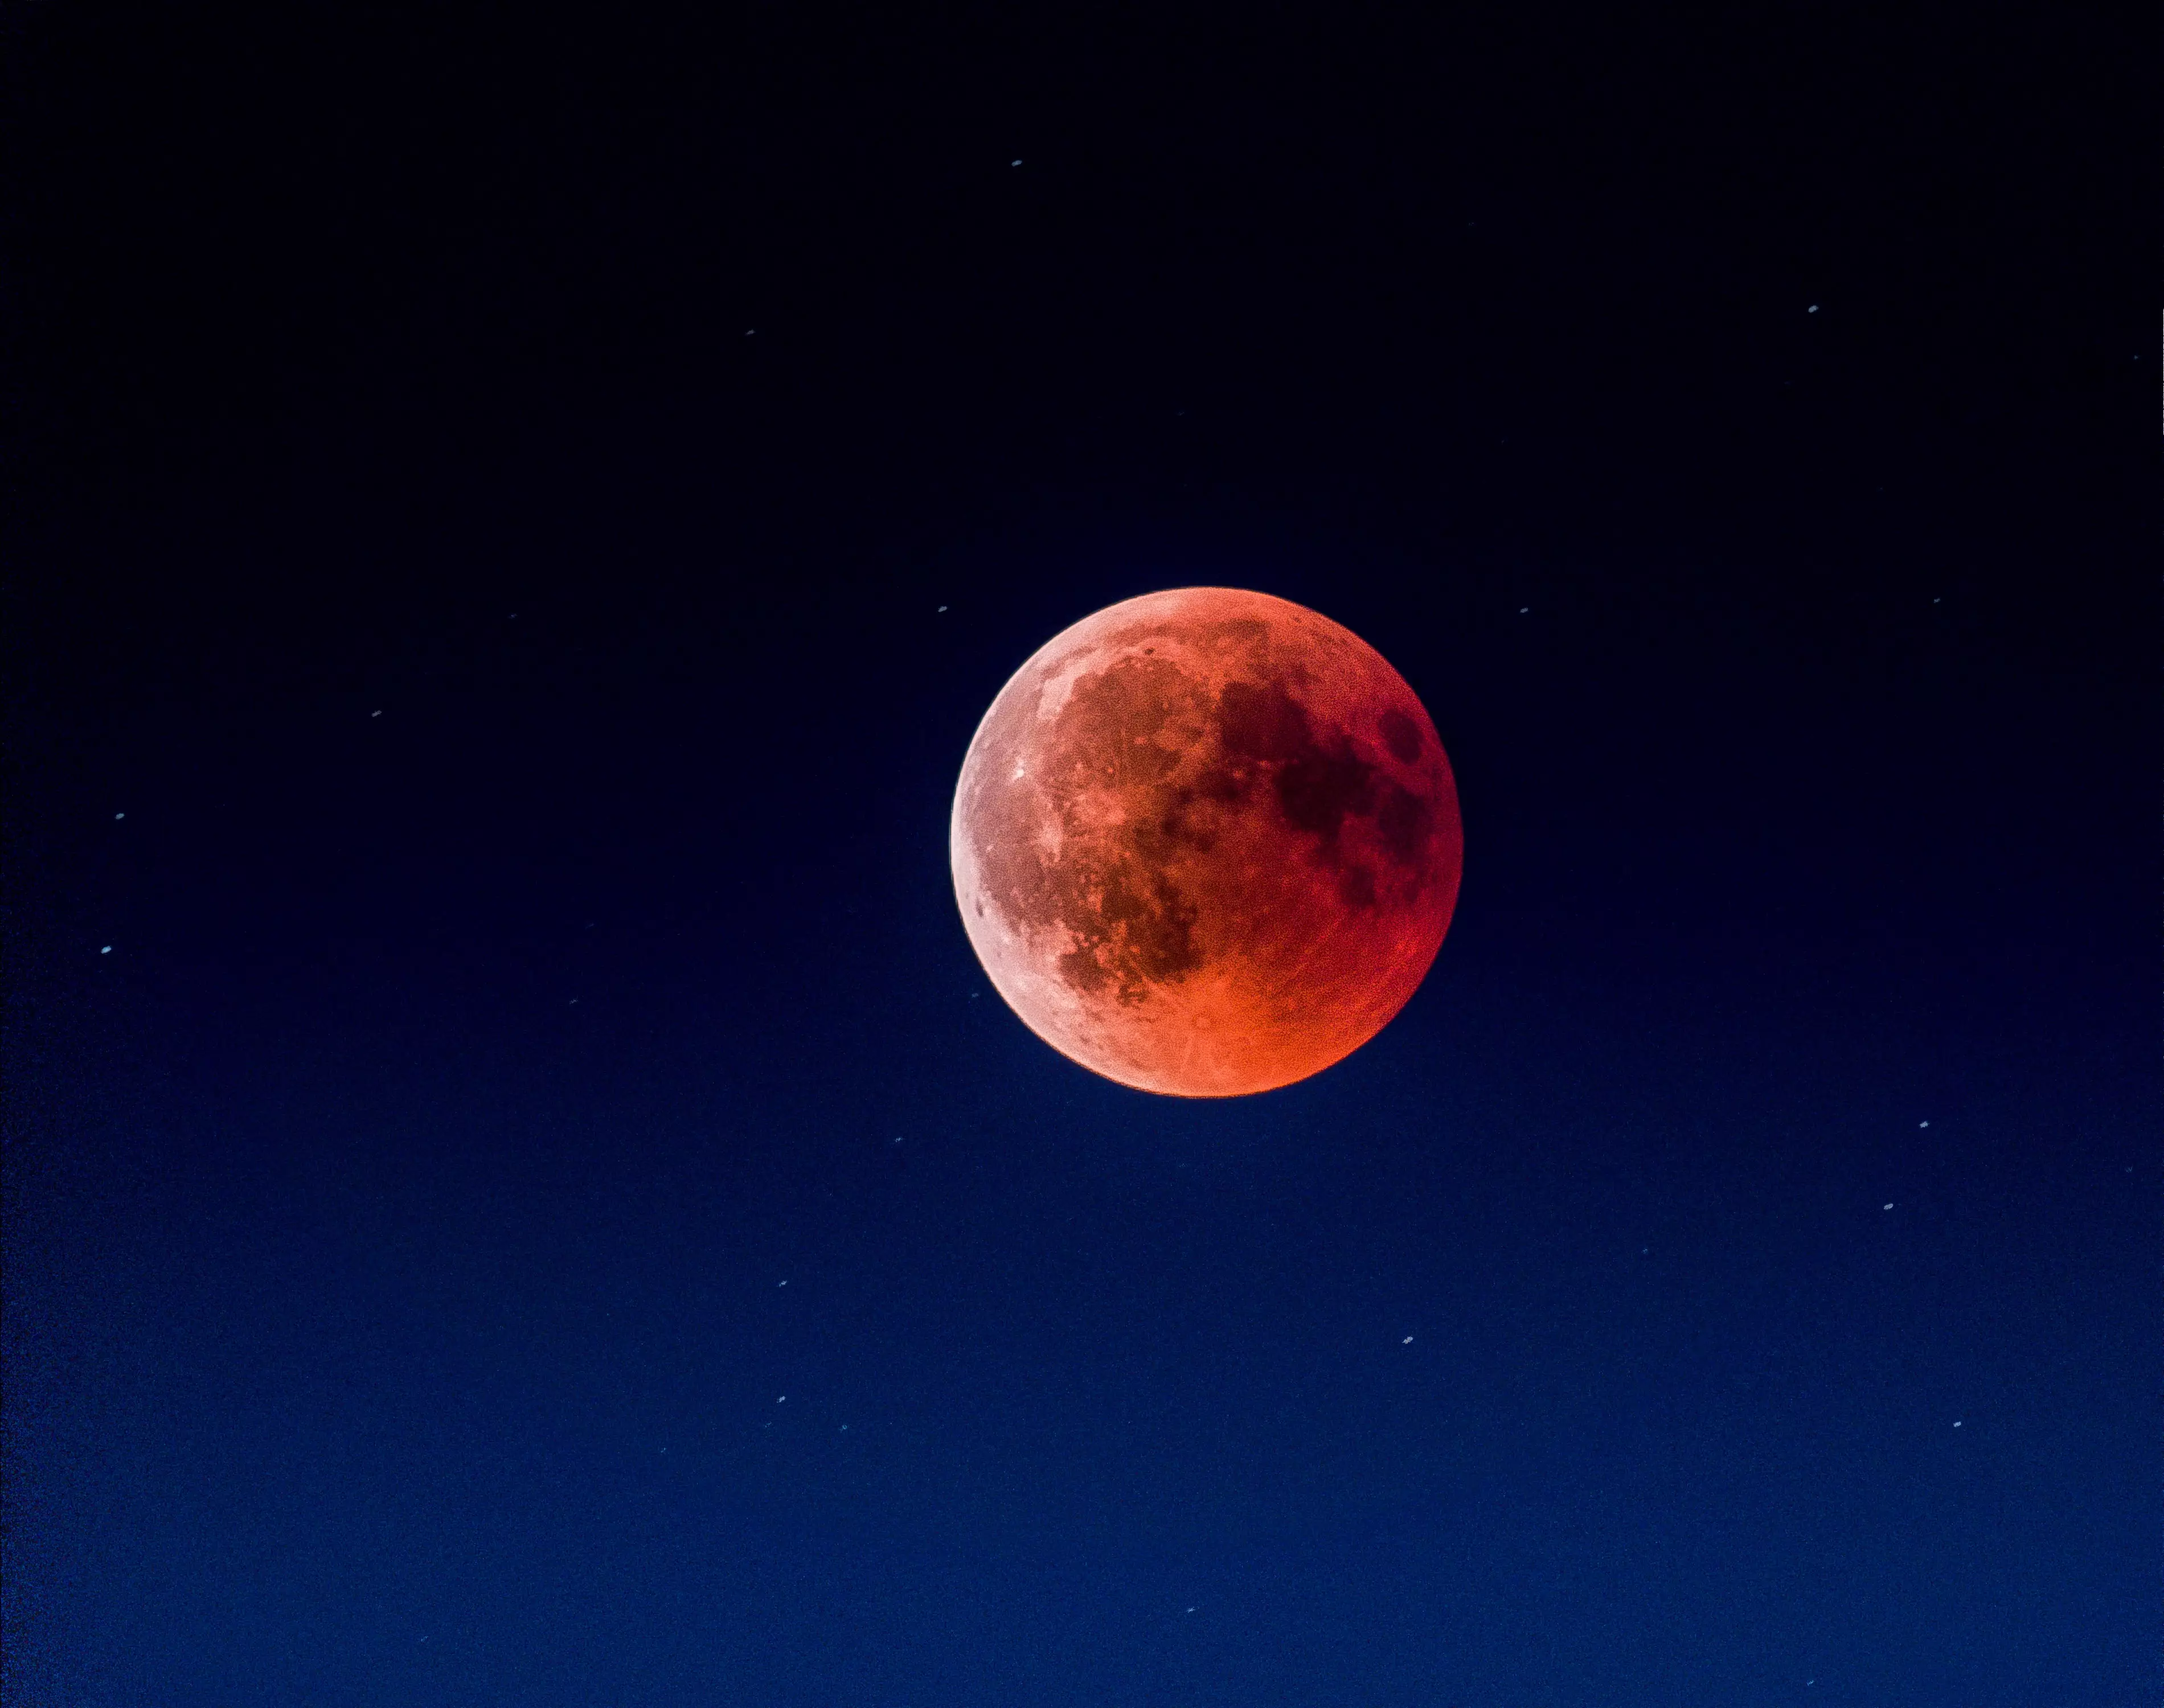 A blood moon happens when the Earth aligns between the sun and the moon (